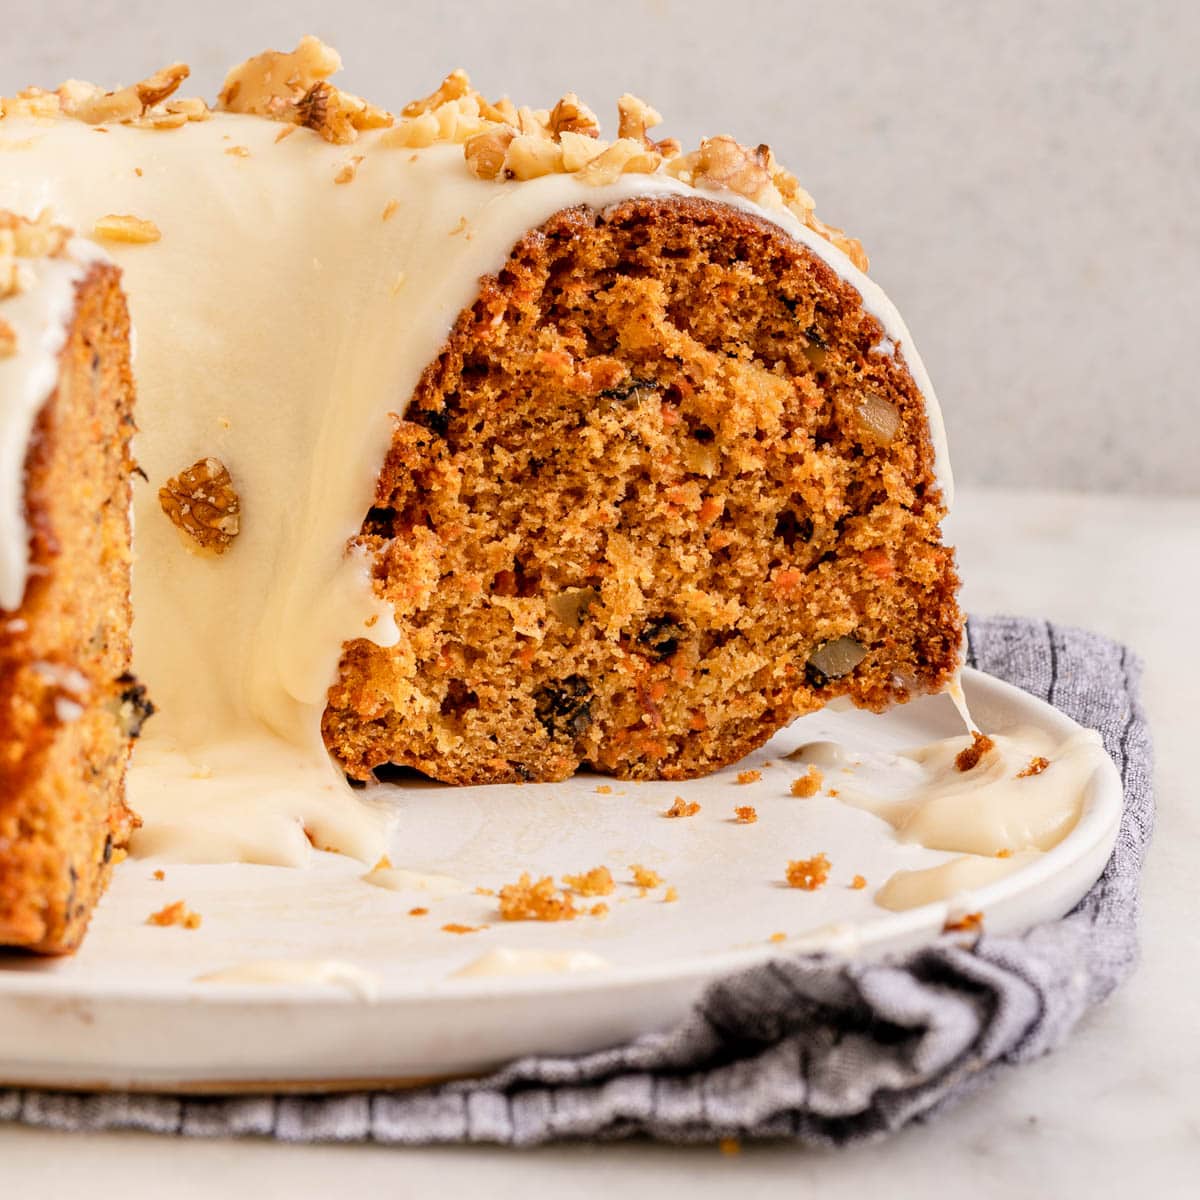 Carrot Bundt Cake with Cream Cheese Frosting